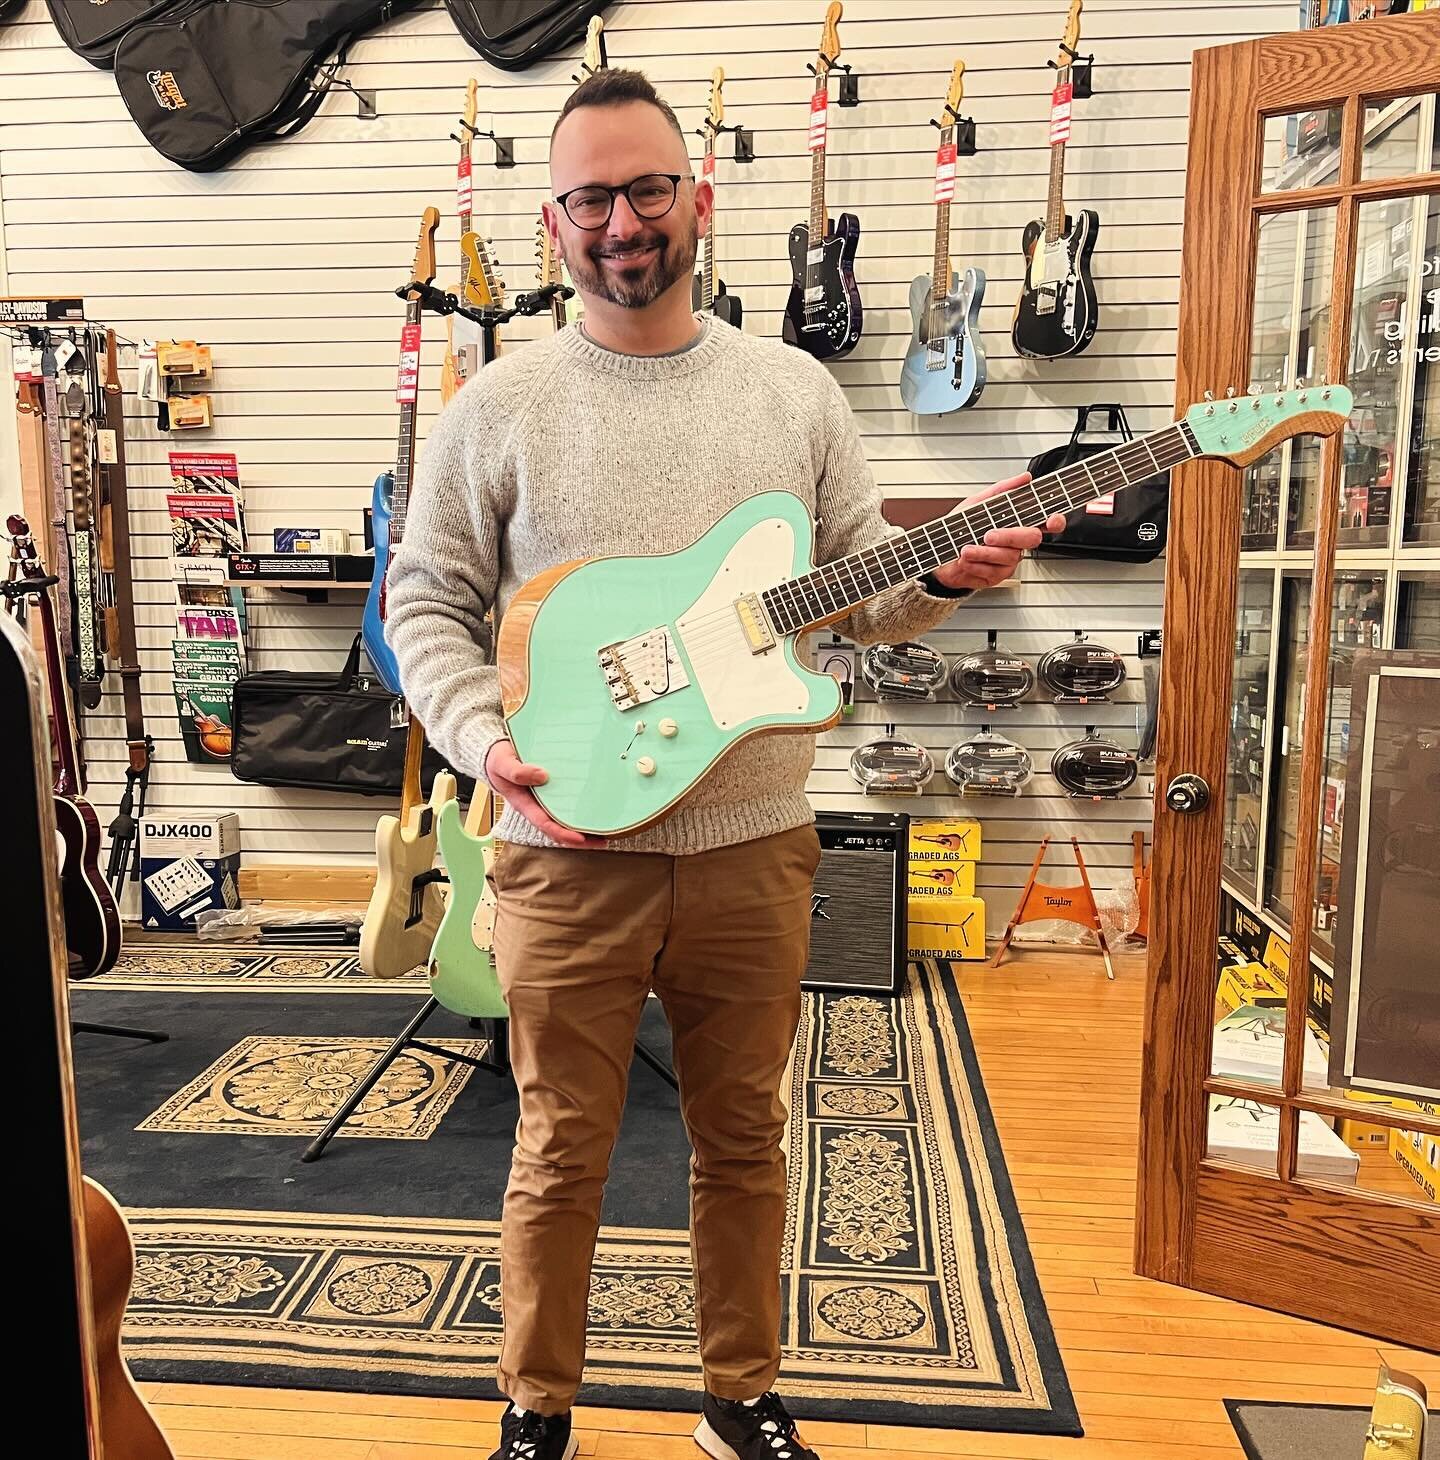 Proud new owner of a Bruce Guitar!
-
@davidpotterrealtor took this surf green Ellary home today, it is SO fun to see my guitars end up in the hands of such amazing people like David.  That guitar is well deserved, David ❤️
-
Thank you also @lidgettmu